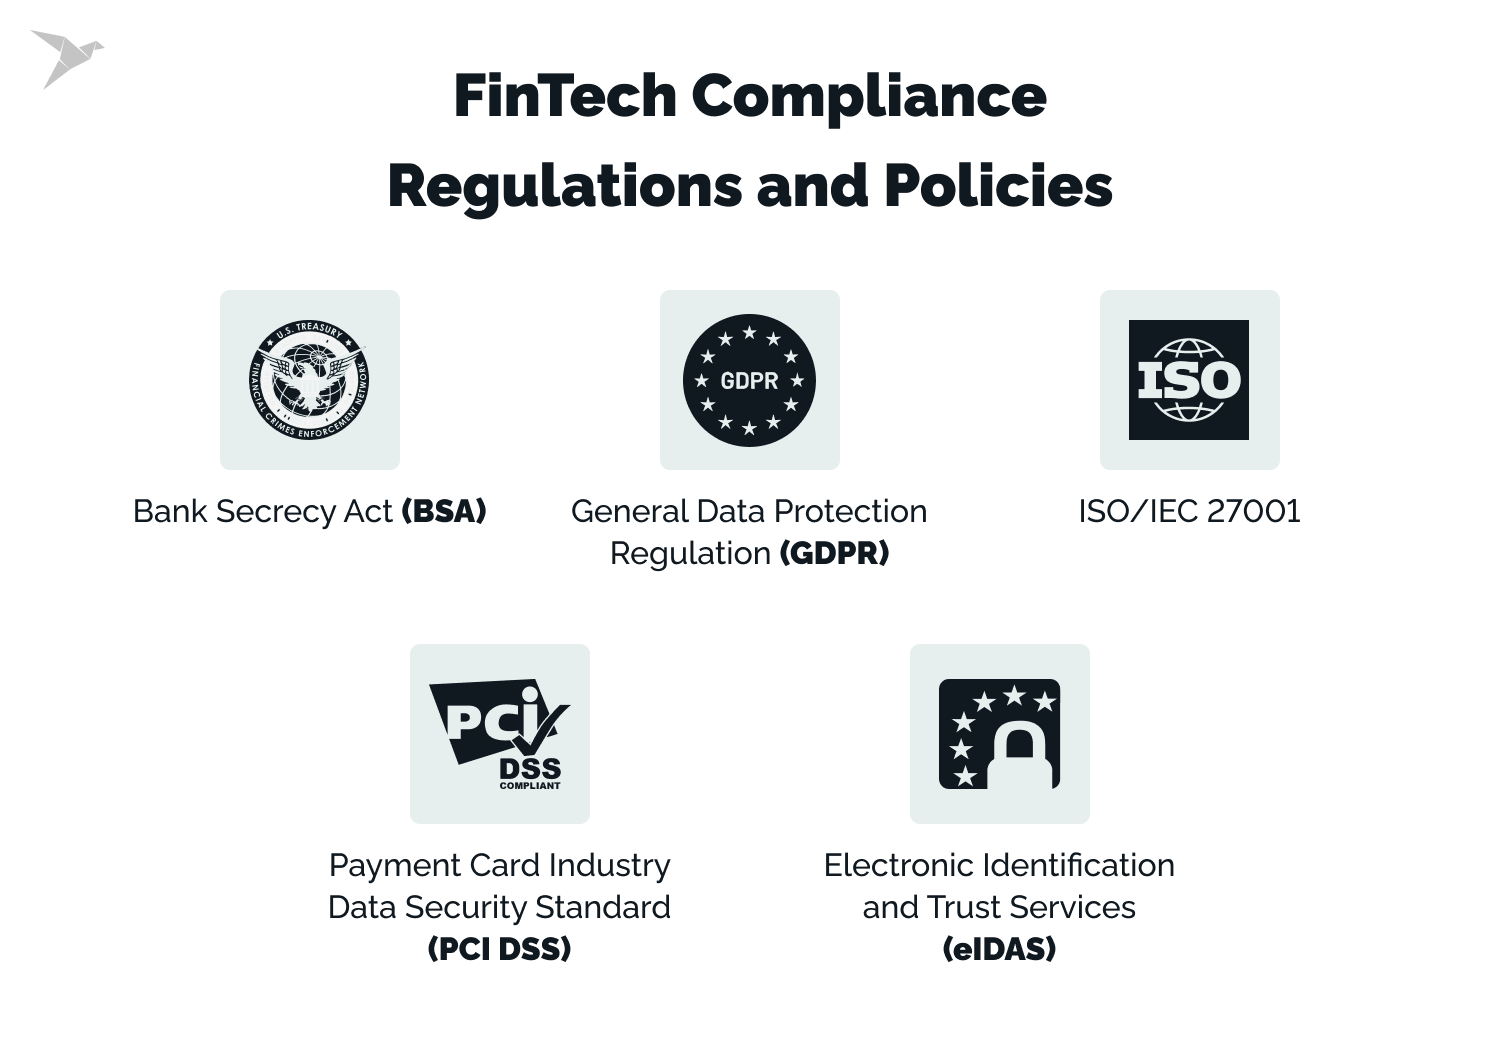 fintech regulations and polices